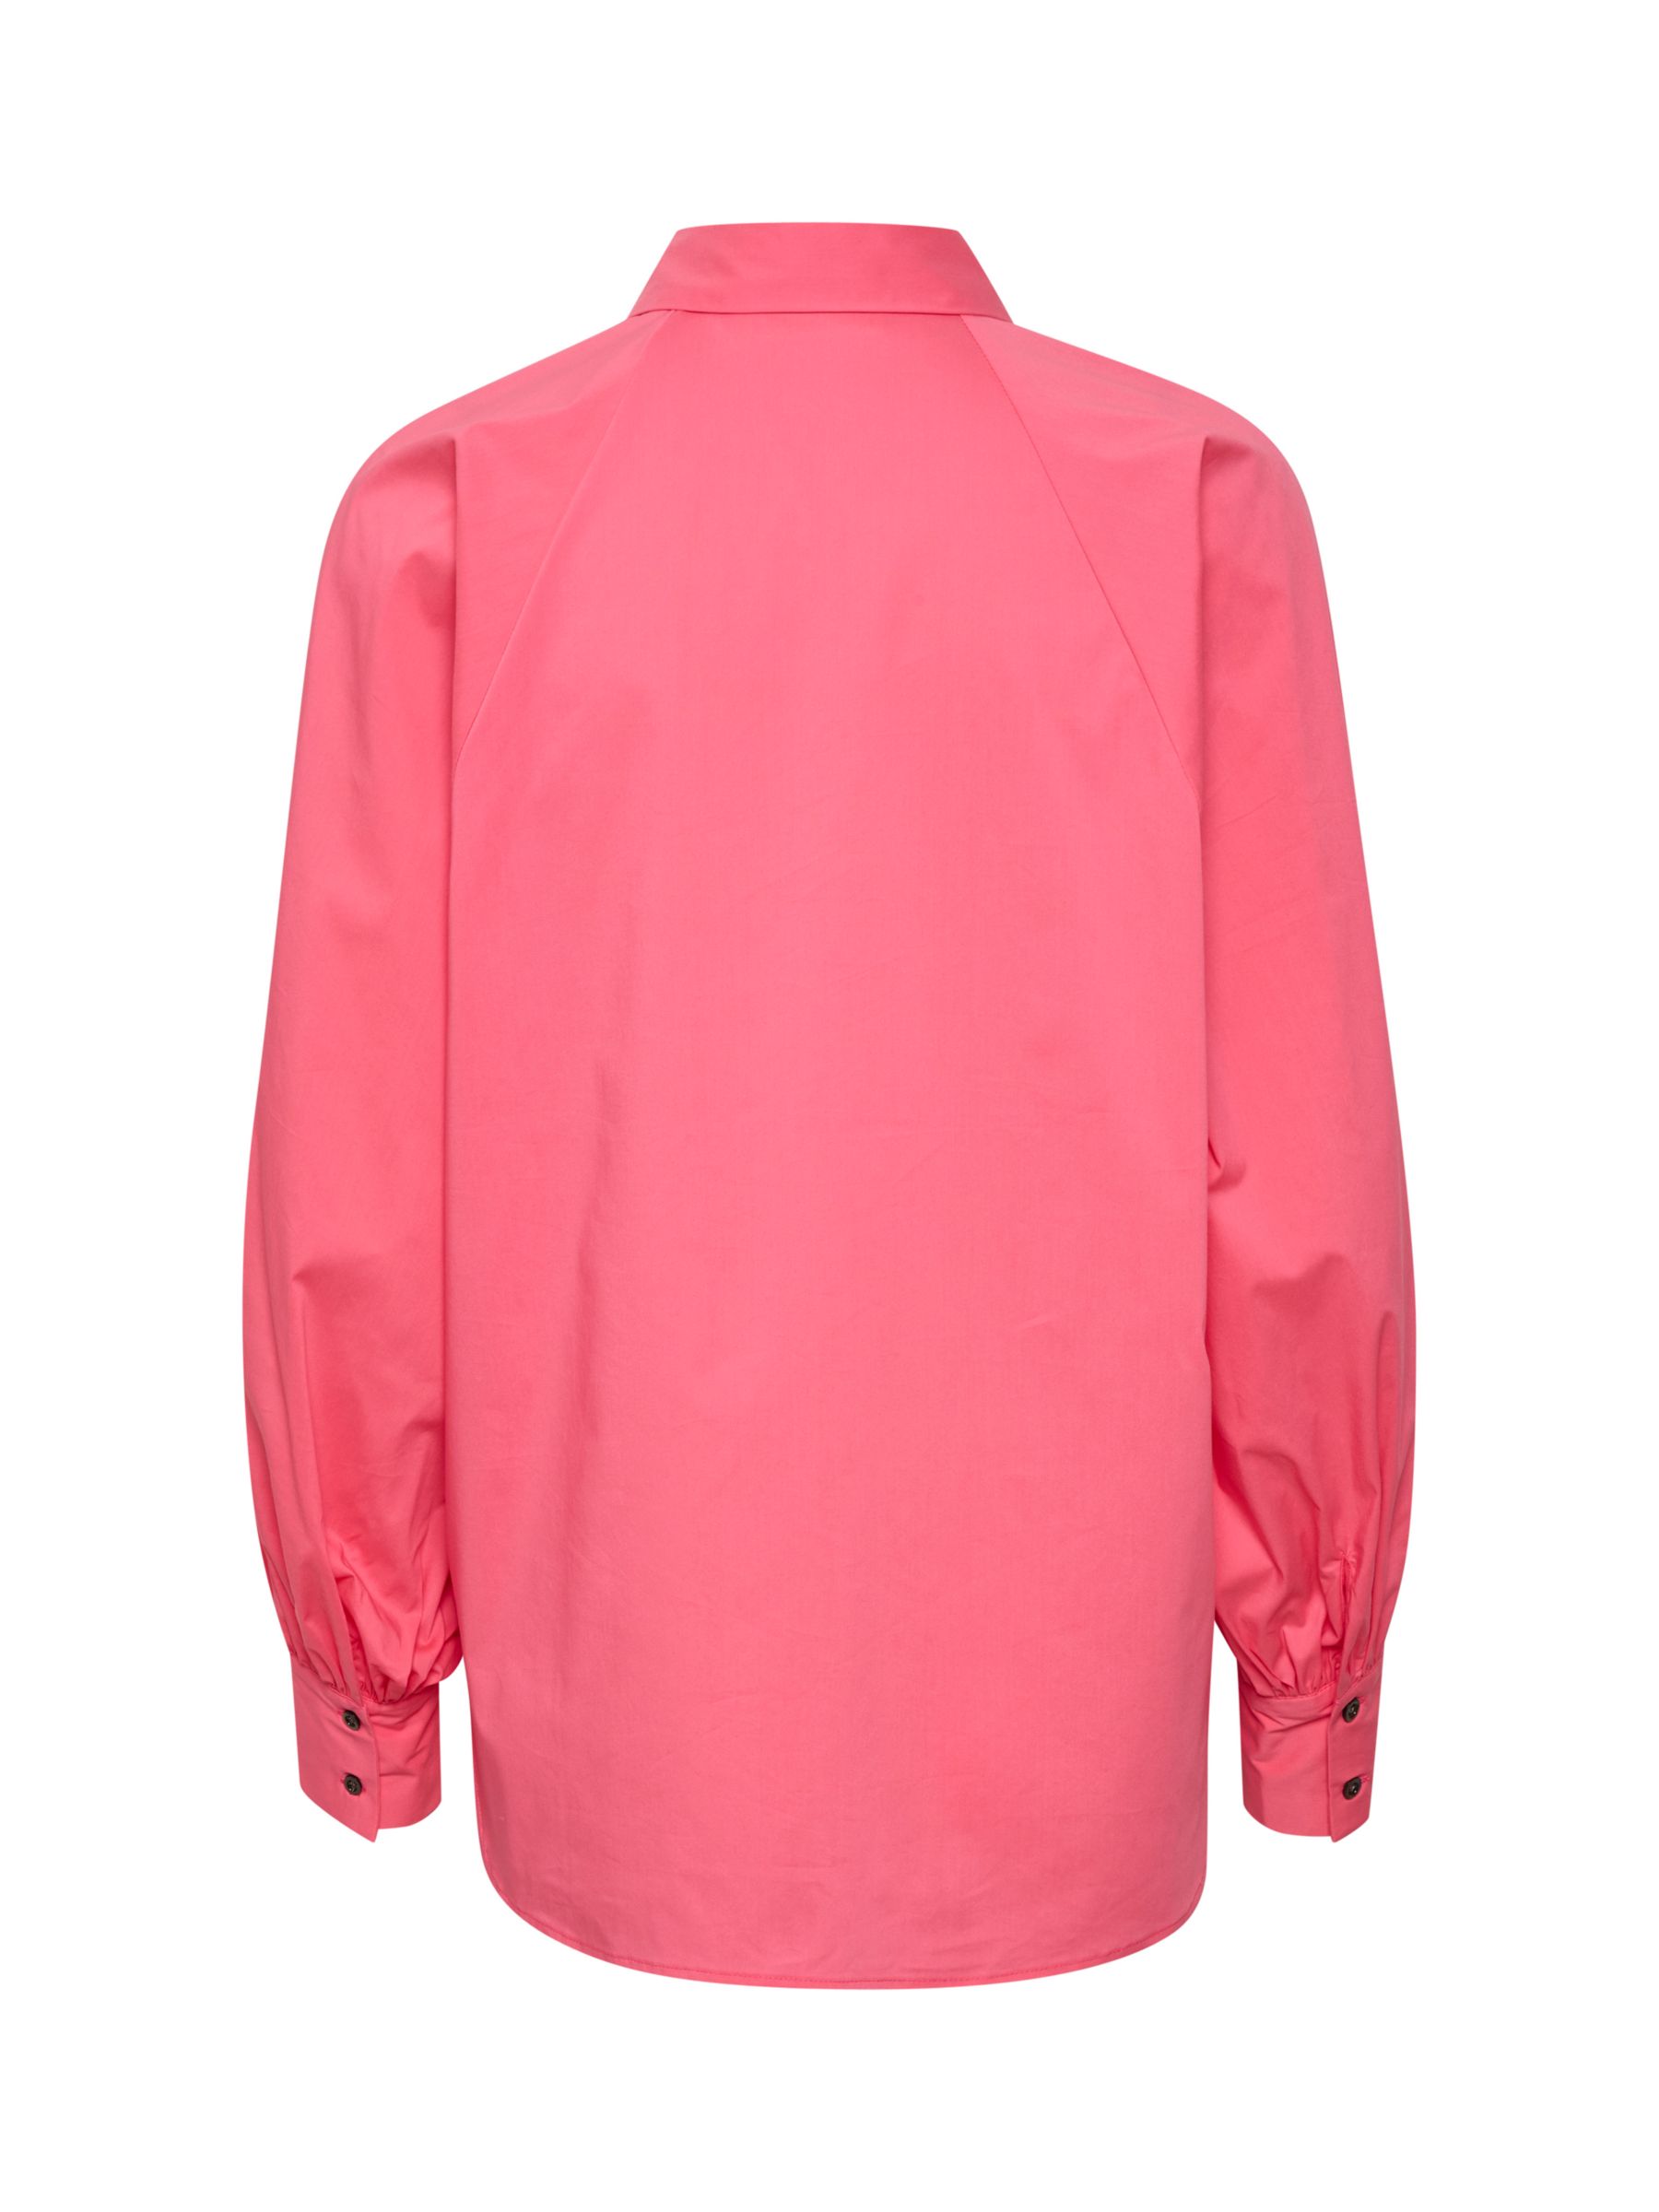 InWear Dilliam Relaxed Fit Long Sleeve Shirt, Pink Rose at John Lewis ...